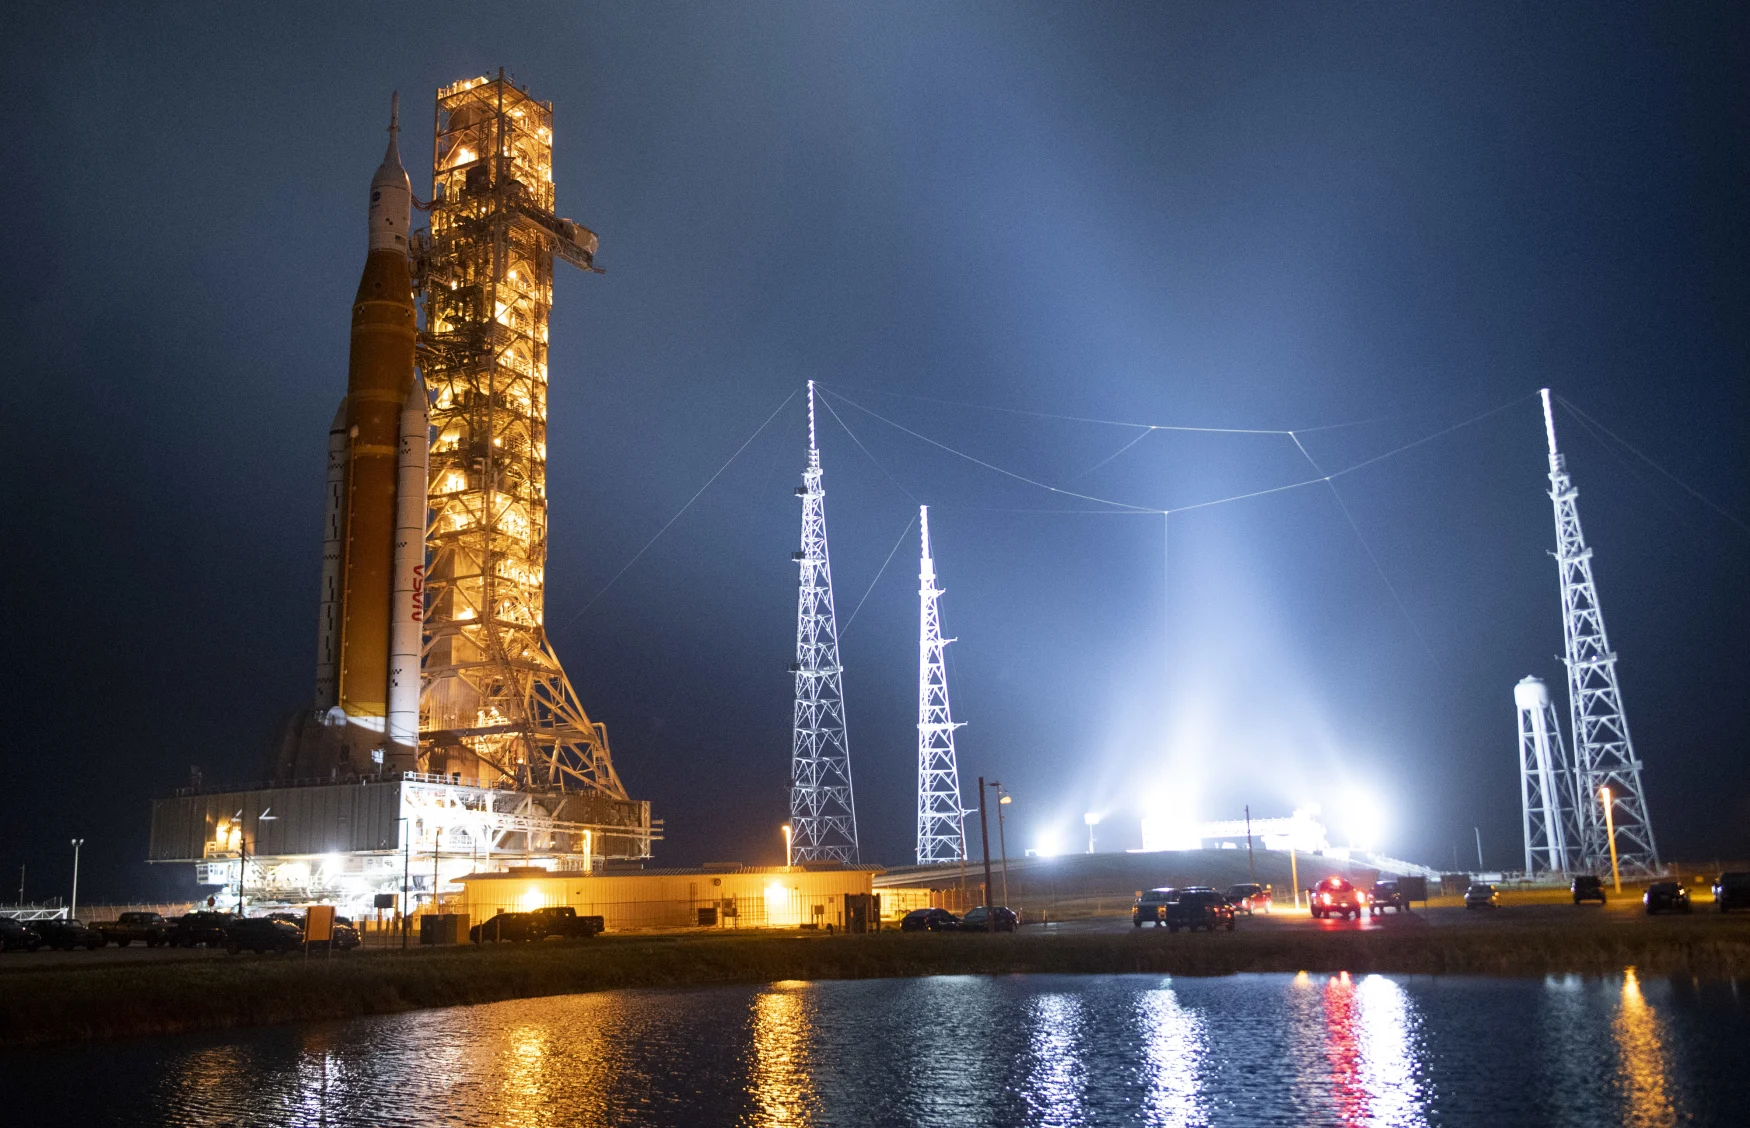 CAPE CANAVERAL, FL - NOVEMBER 3: In this handout photo provided by NASA, NASAs Space Launch System (SLS) rocket with the Orion spacecraft aboard is seen atop the mobile launcher as Crawler Transporter-2 (CT-2) begins to climb the ramp at Launch Pad 39B at NASAs Kennedy Space Center on November 3, 2022 in Cape Canaveral, Florida. NASA's Artemis I mission is the first integrated test of the agency's deep space exploration systems: the Orion spacecraft, SLS rocket, and supporting ground systems. Launch of the uncrewed flight test is targeted for November 14 at 12:07 a.m. EST. (Photo by Joel Kowsky/NASA via Getty Images)